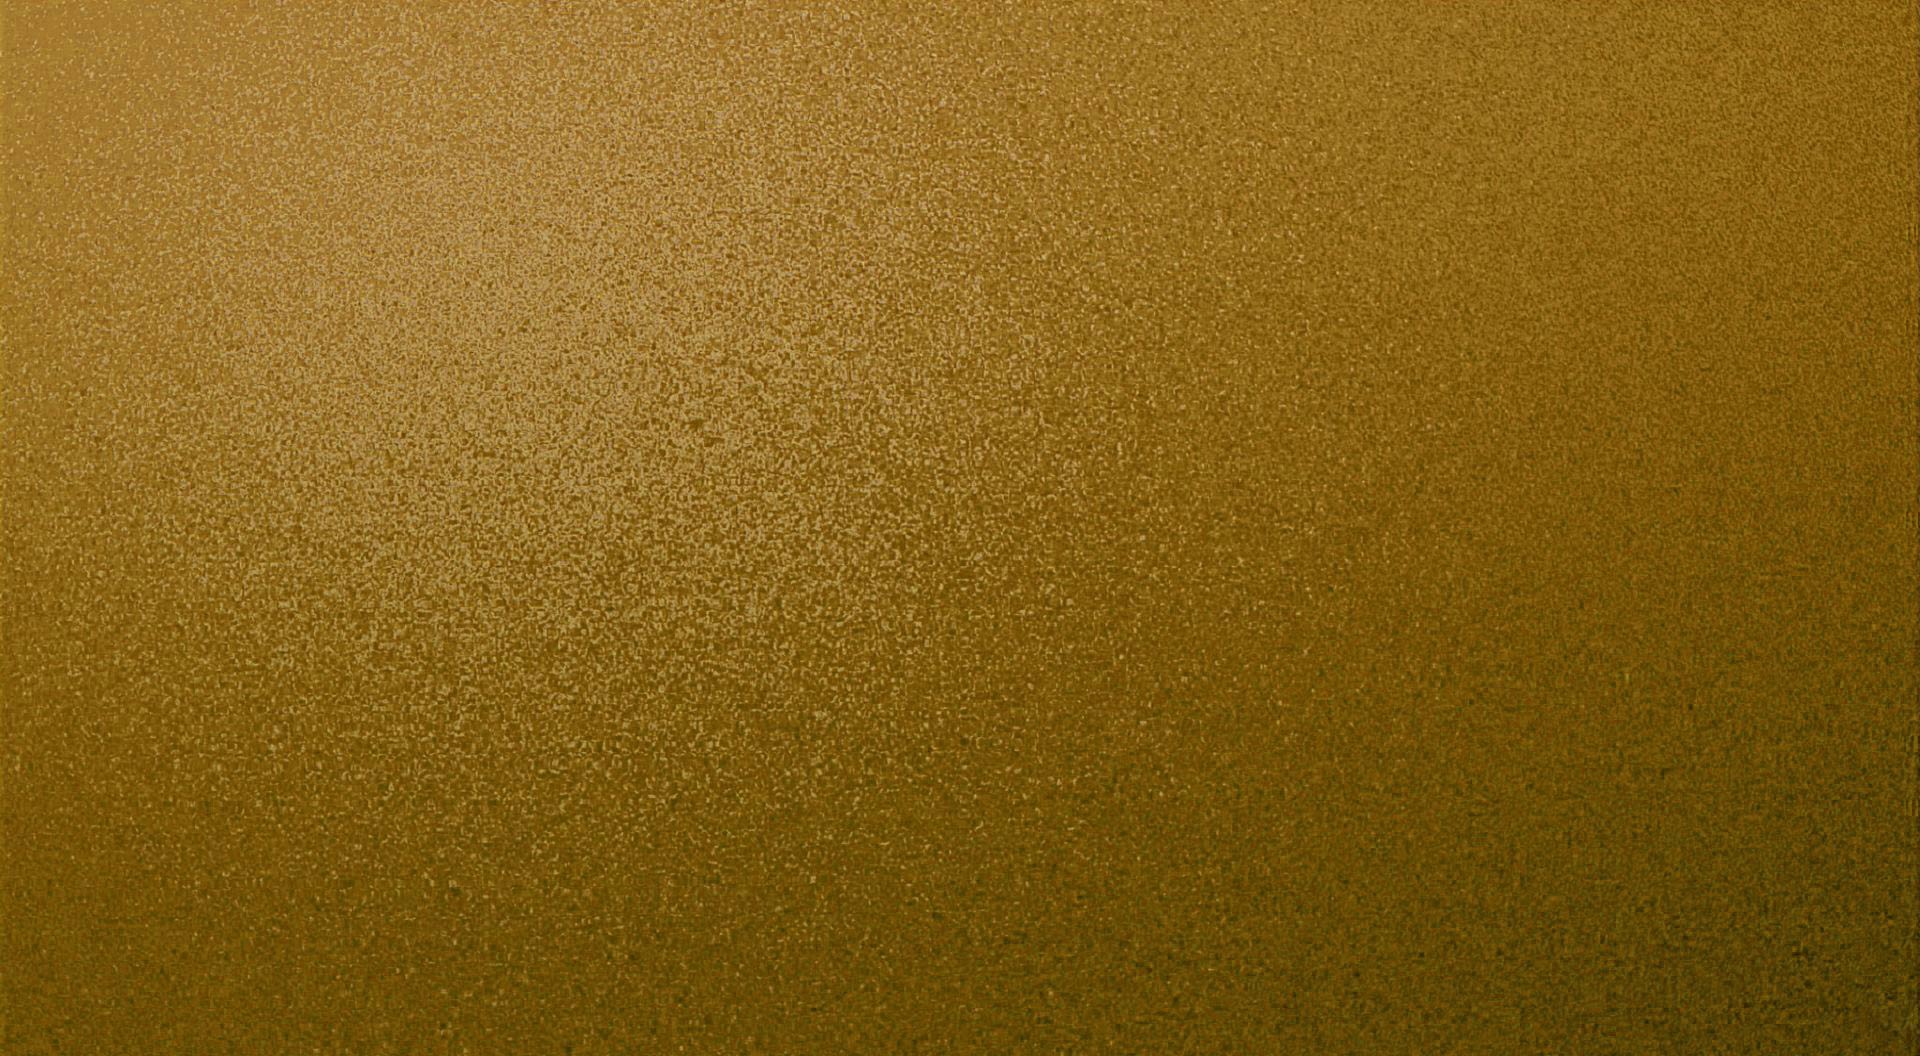 Black and Gold textures backgrounds